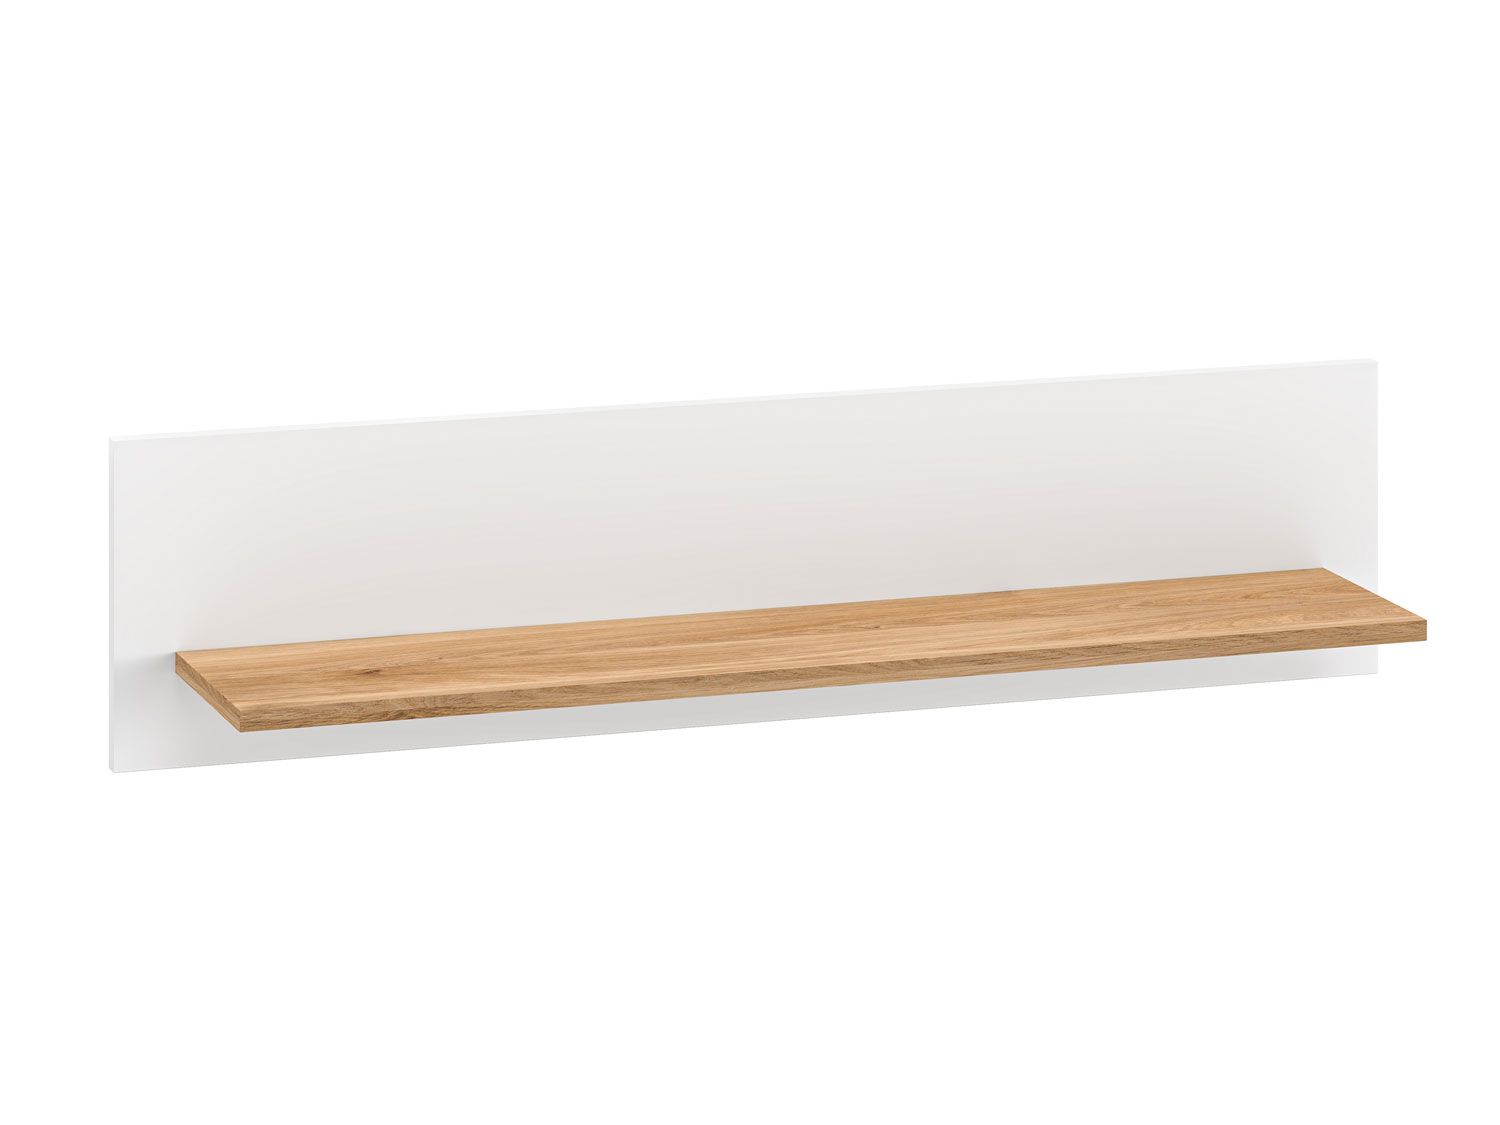 Hanging shelf / wall shelf with one shelf Mackinac 10, color: white / oak, dimensions: 25 x 101 x 21 cm, easy to combine with other furniture